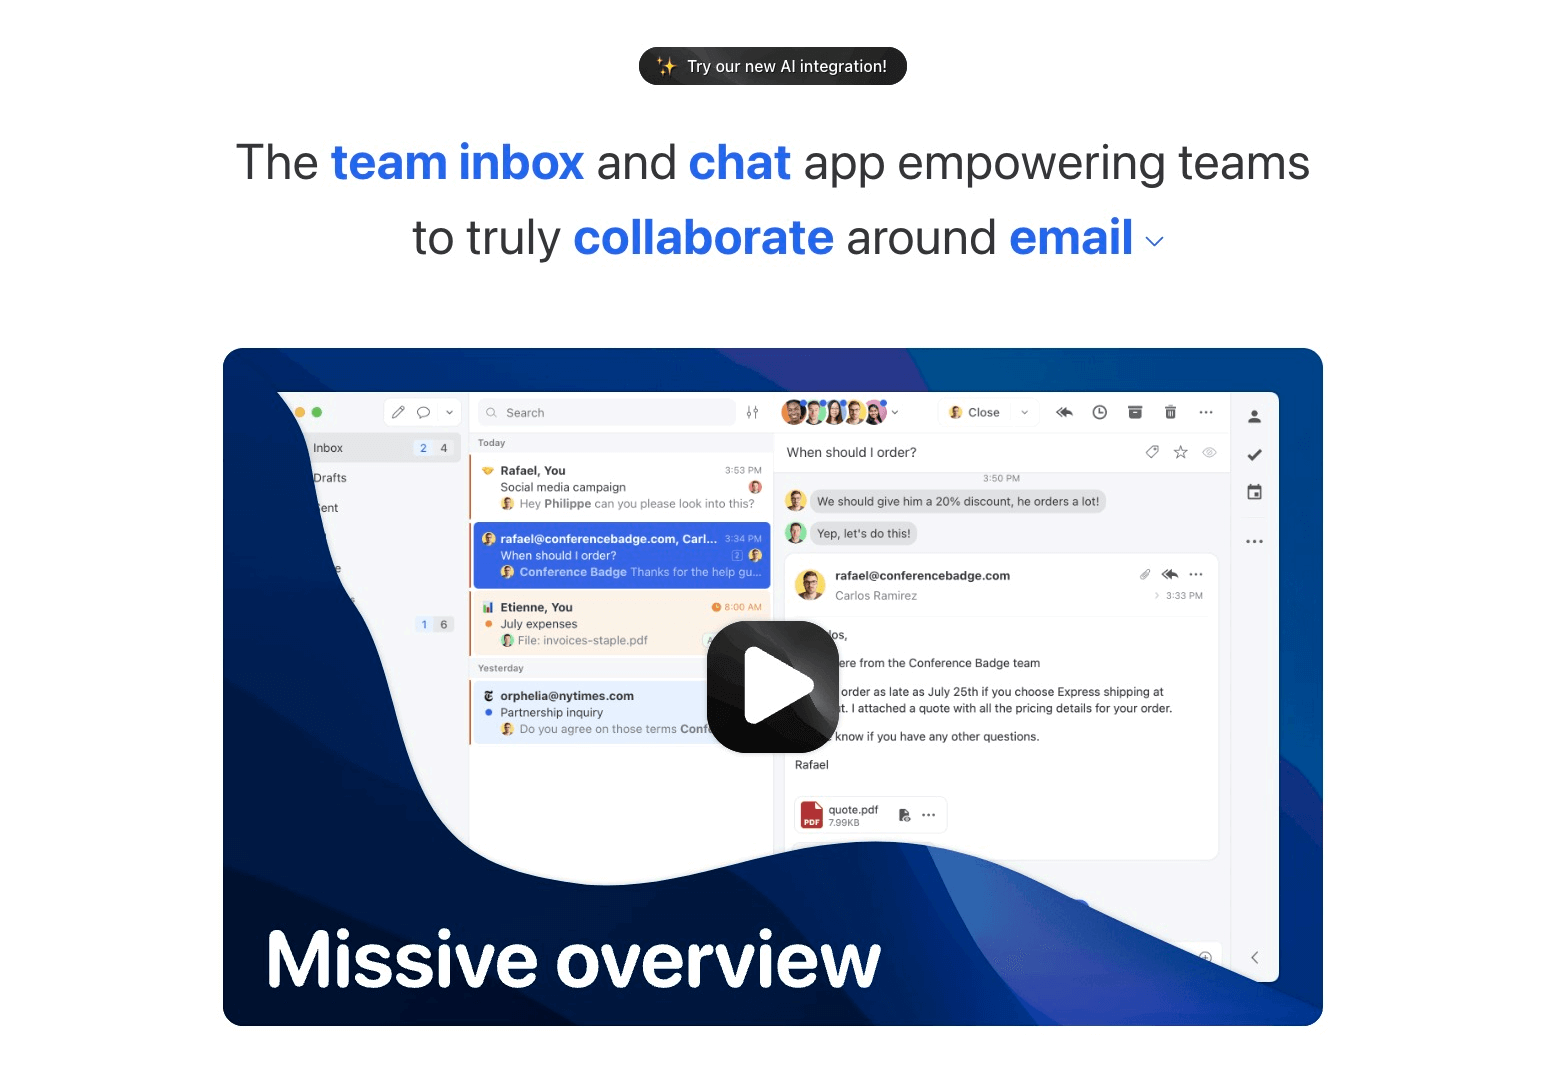 Missive’s front page features a video overview, putting their team inbox and chat app front and center.